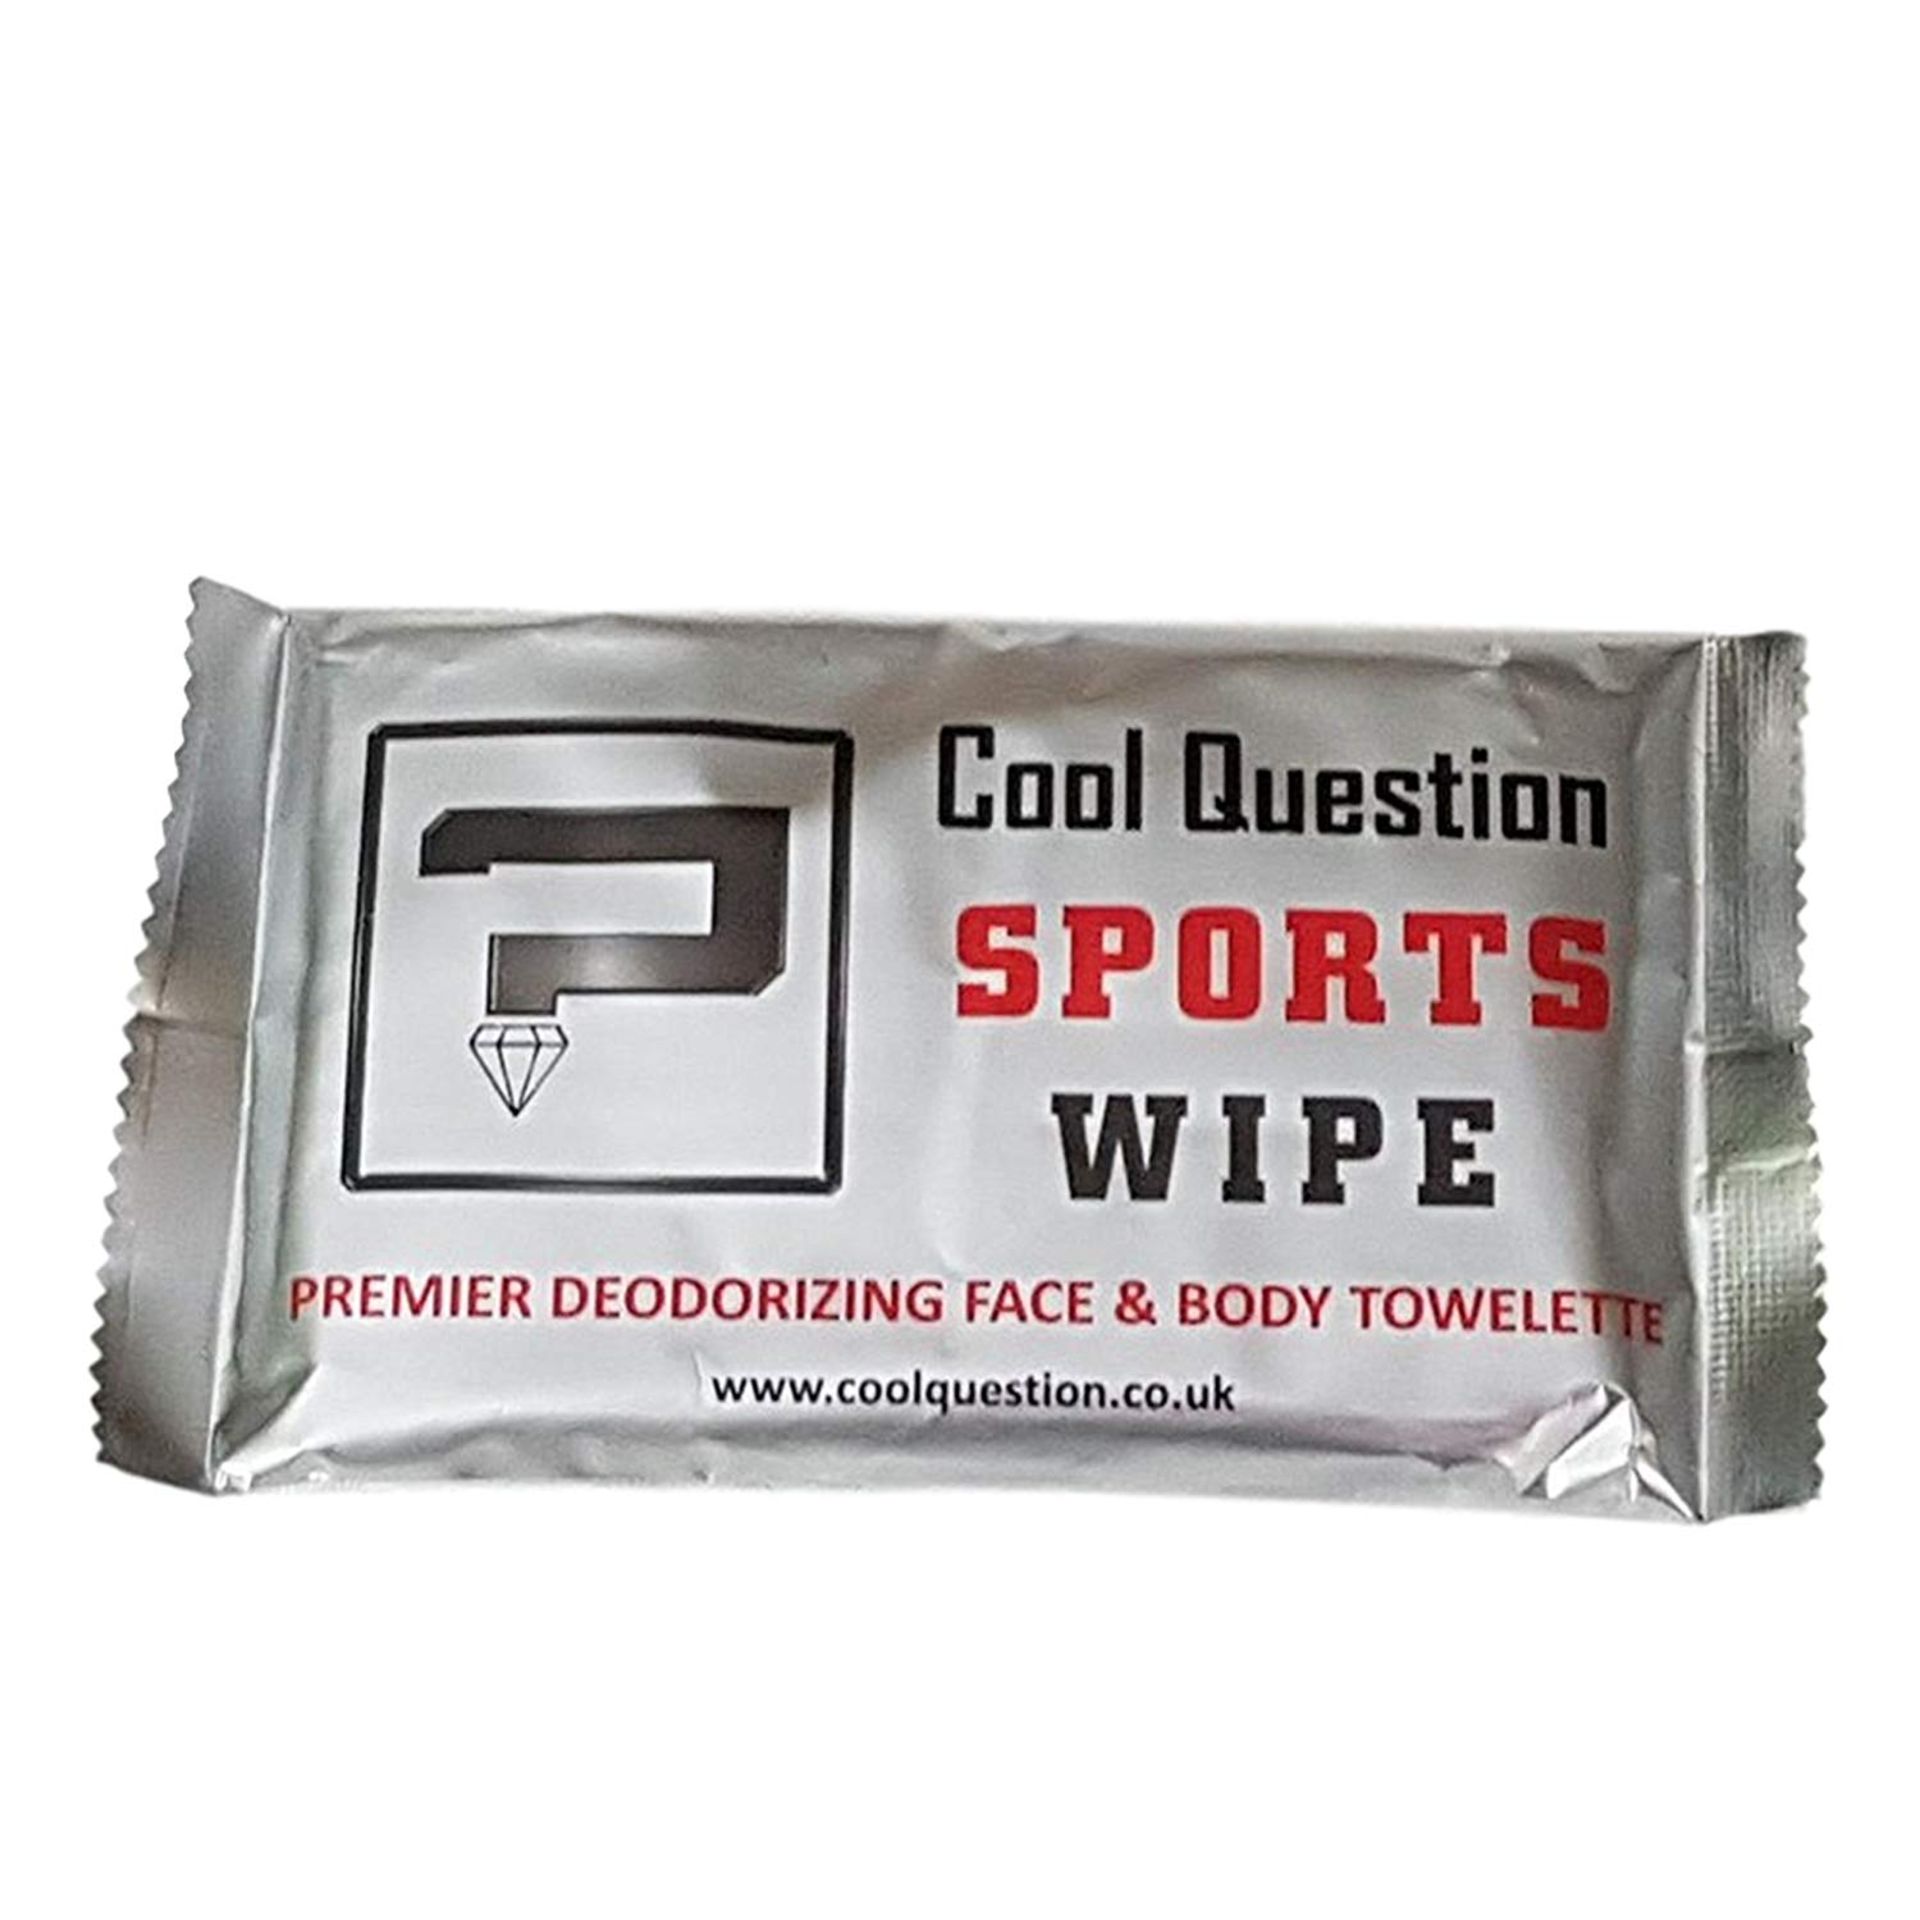 19x NEW Cool Question Individually Wrapped Adult Sports Towellete